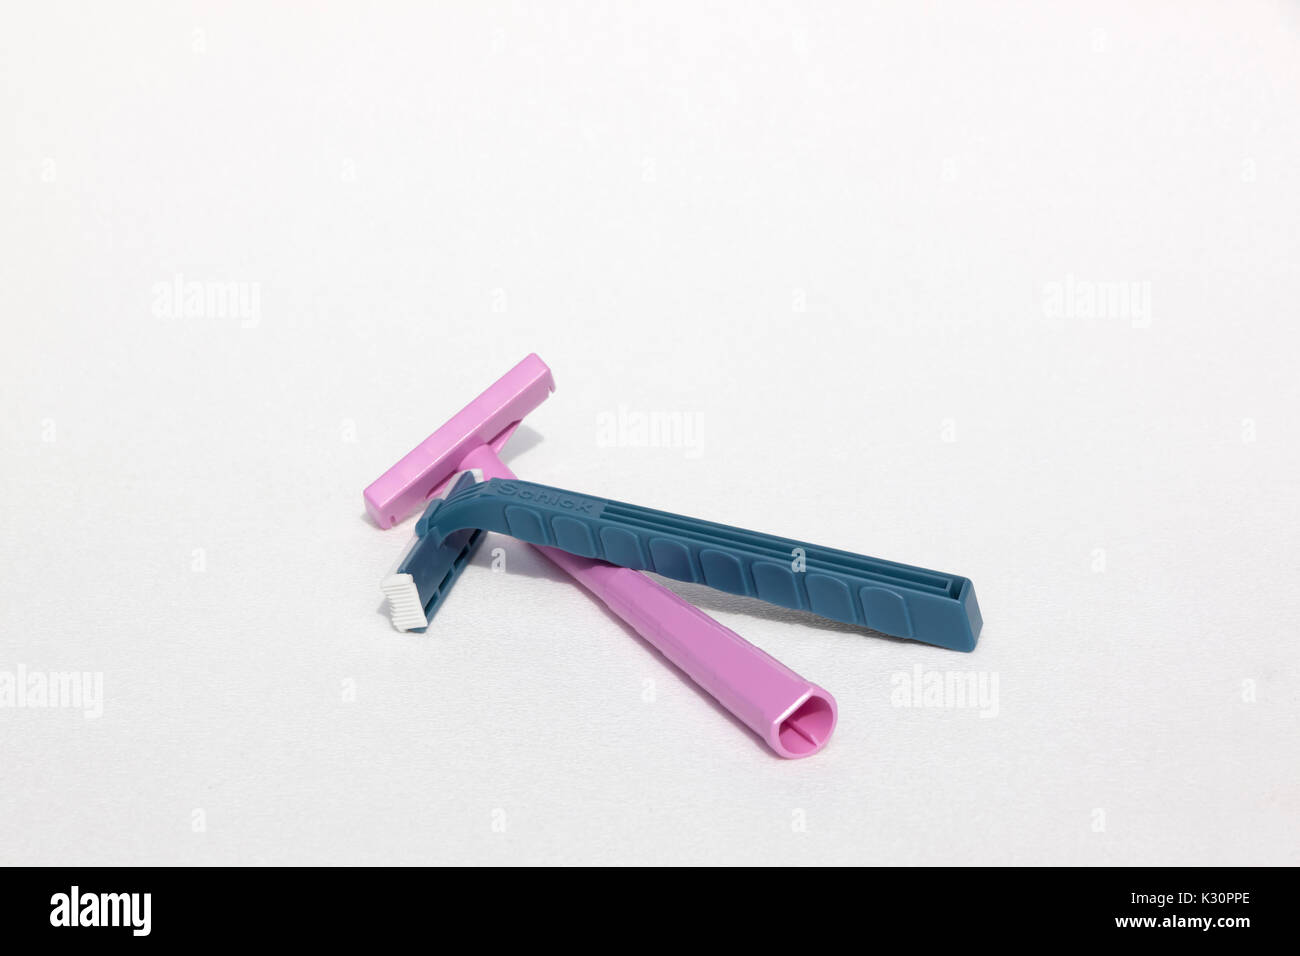 A blue Schick disposable & pink Bic disposable razor both made from the plastic, polypropylene. Stock Photo